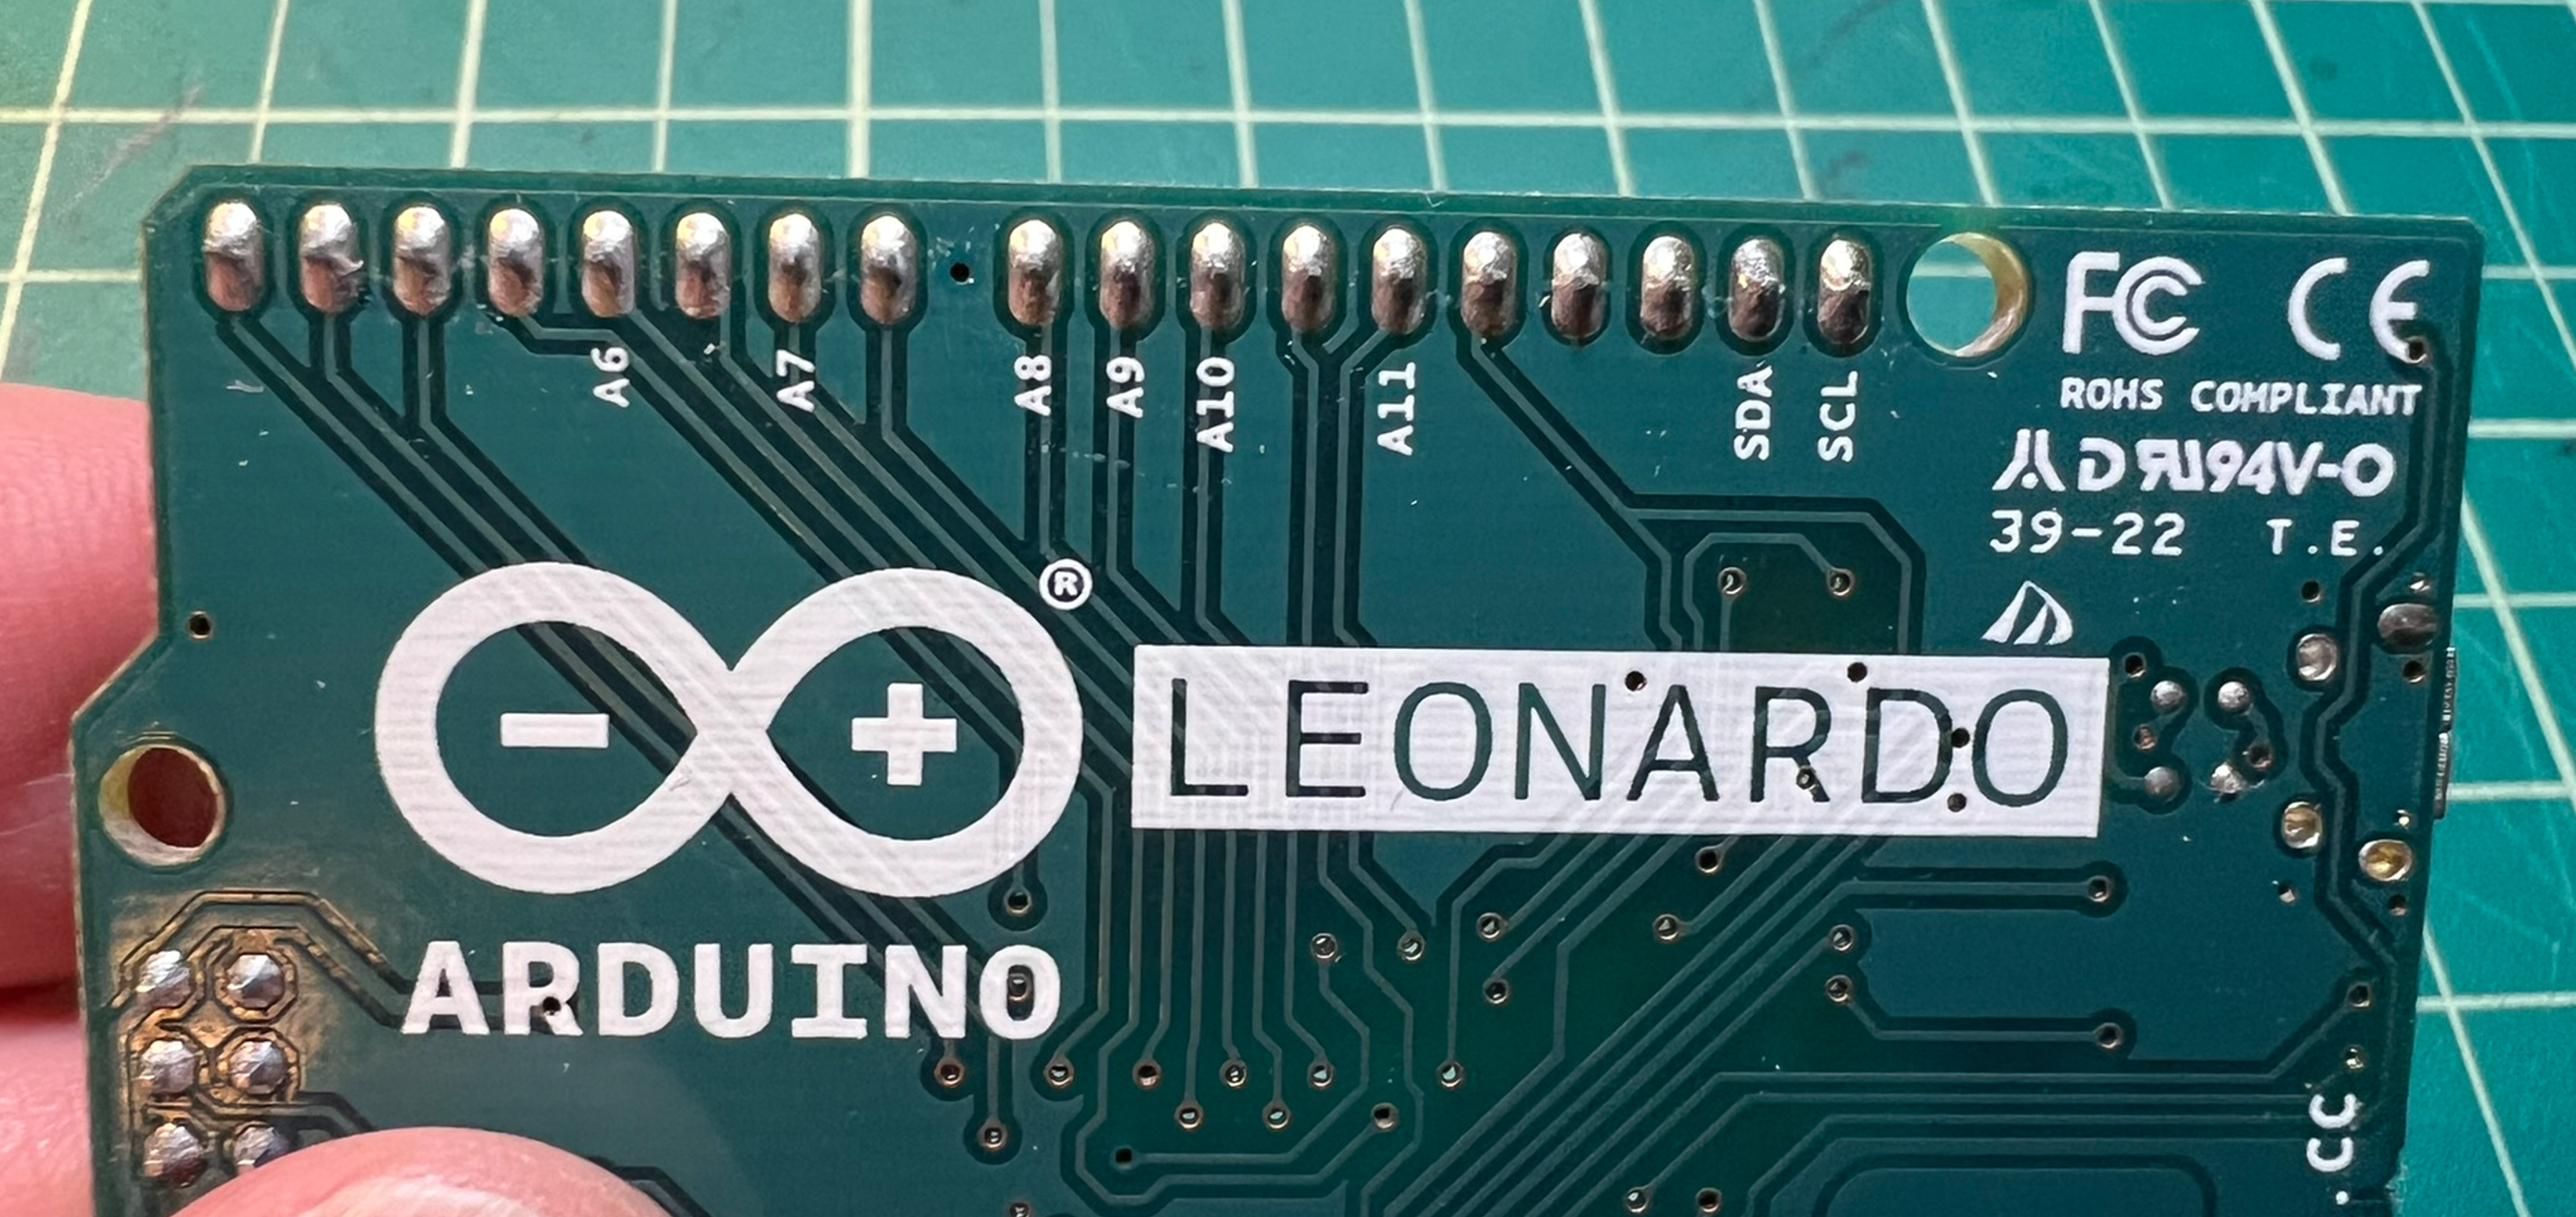 Arduino Leonardo has six extra analog inputs, as labeled on the back of the board